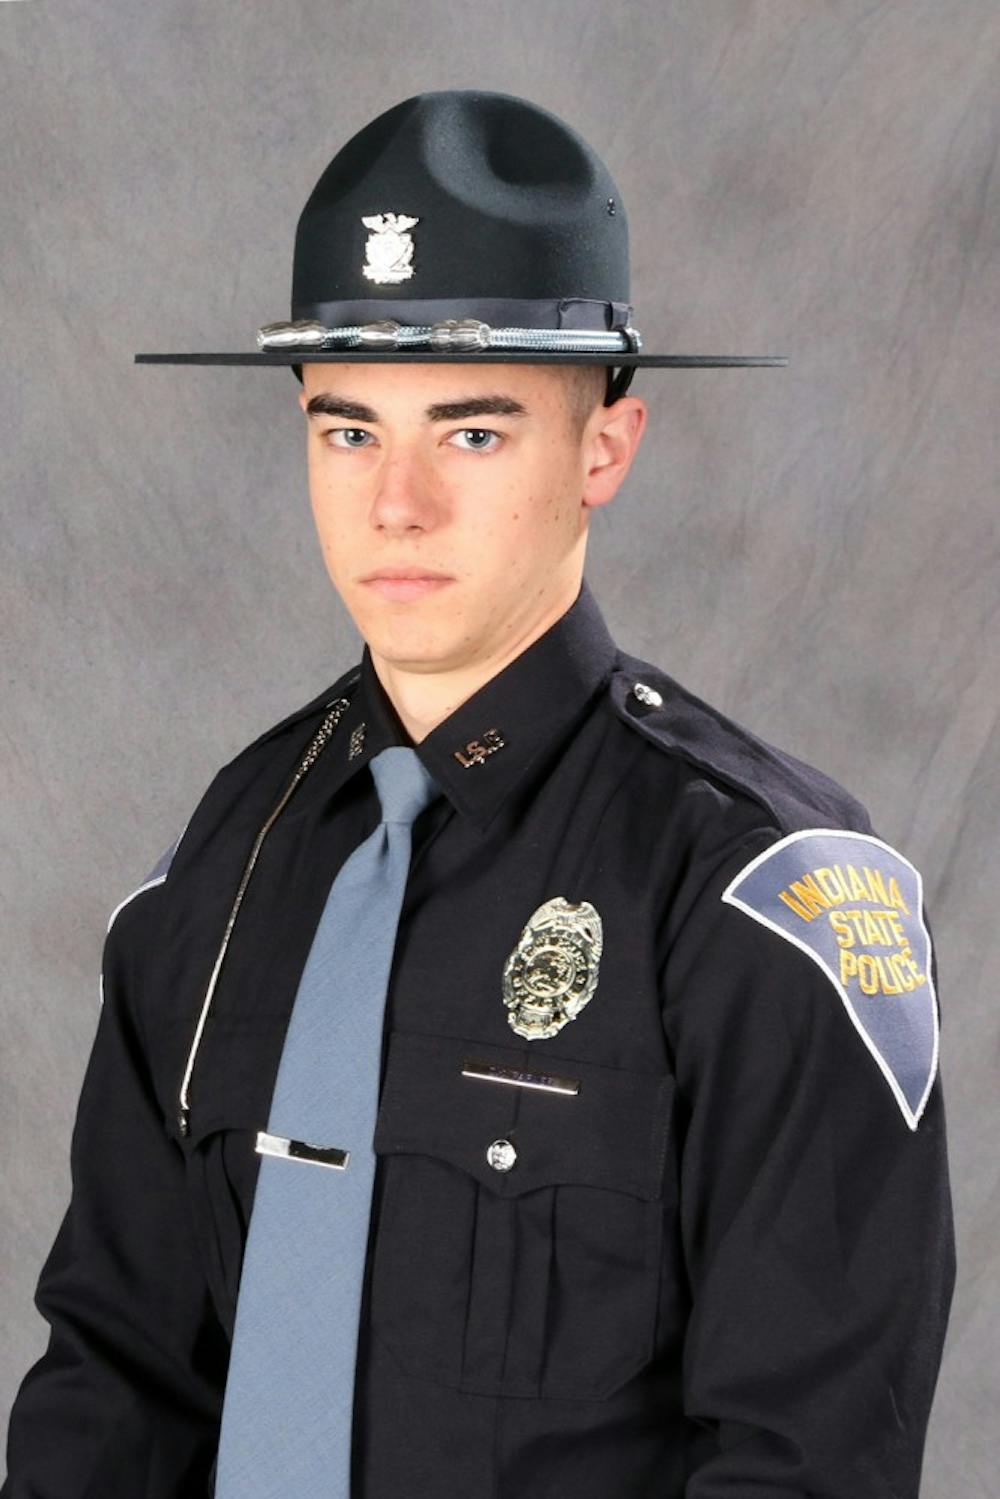 Zachery Parker is named one of the four troopers assigned to Bloomington. 